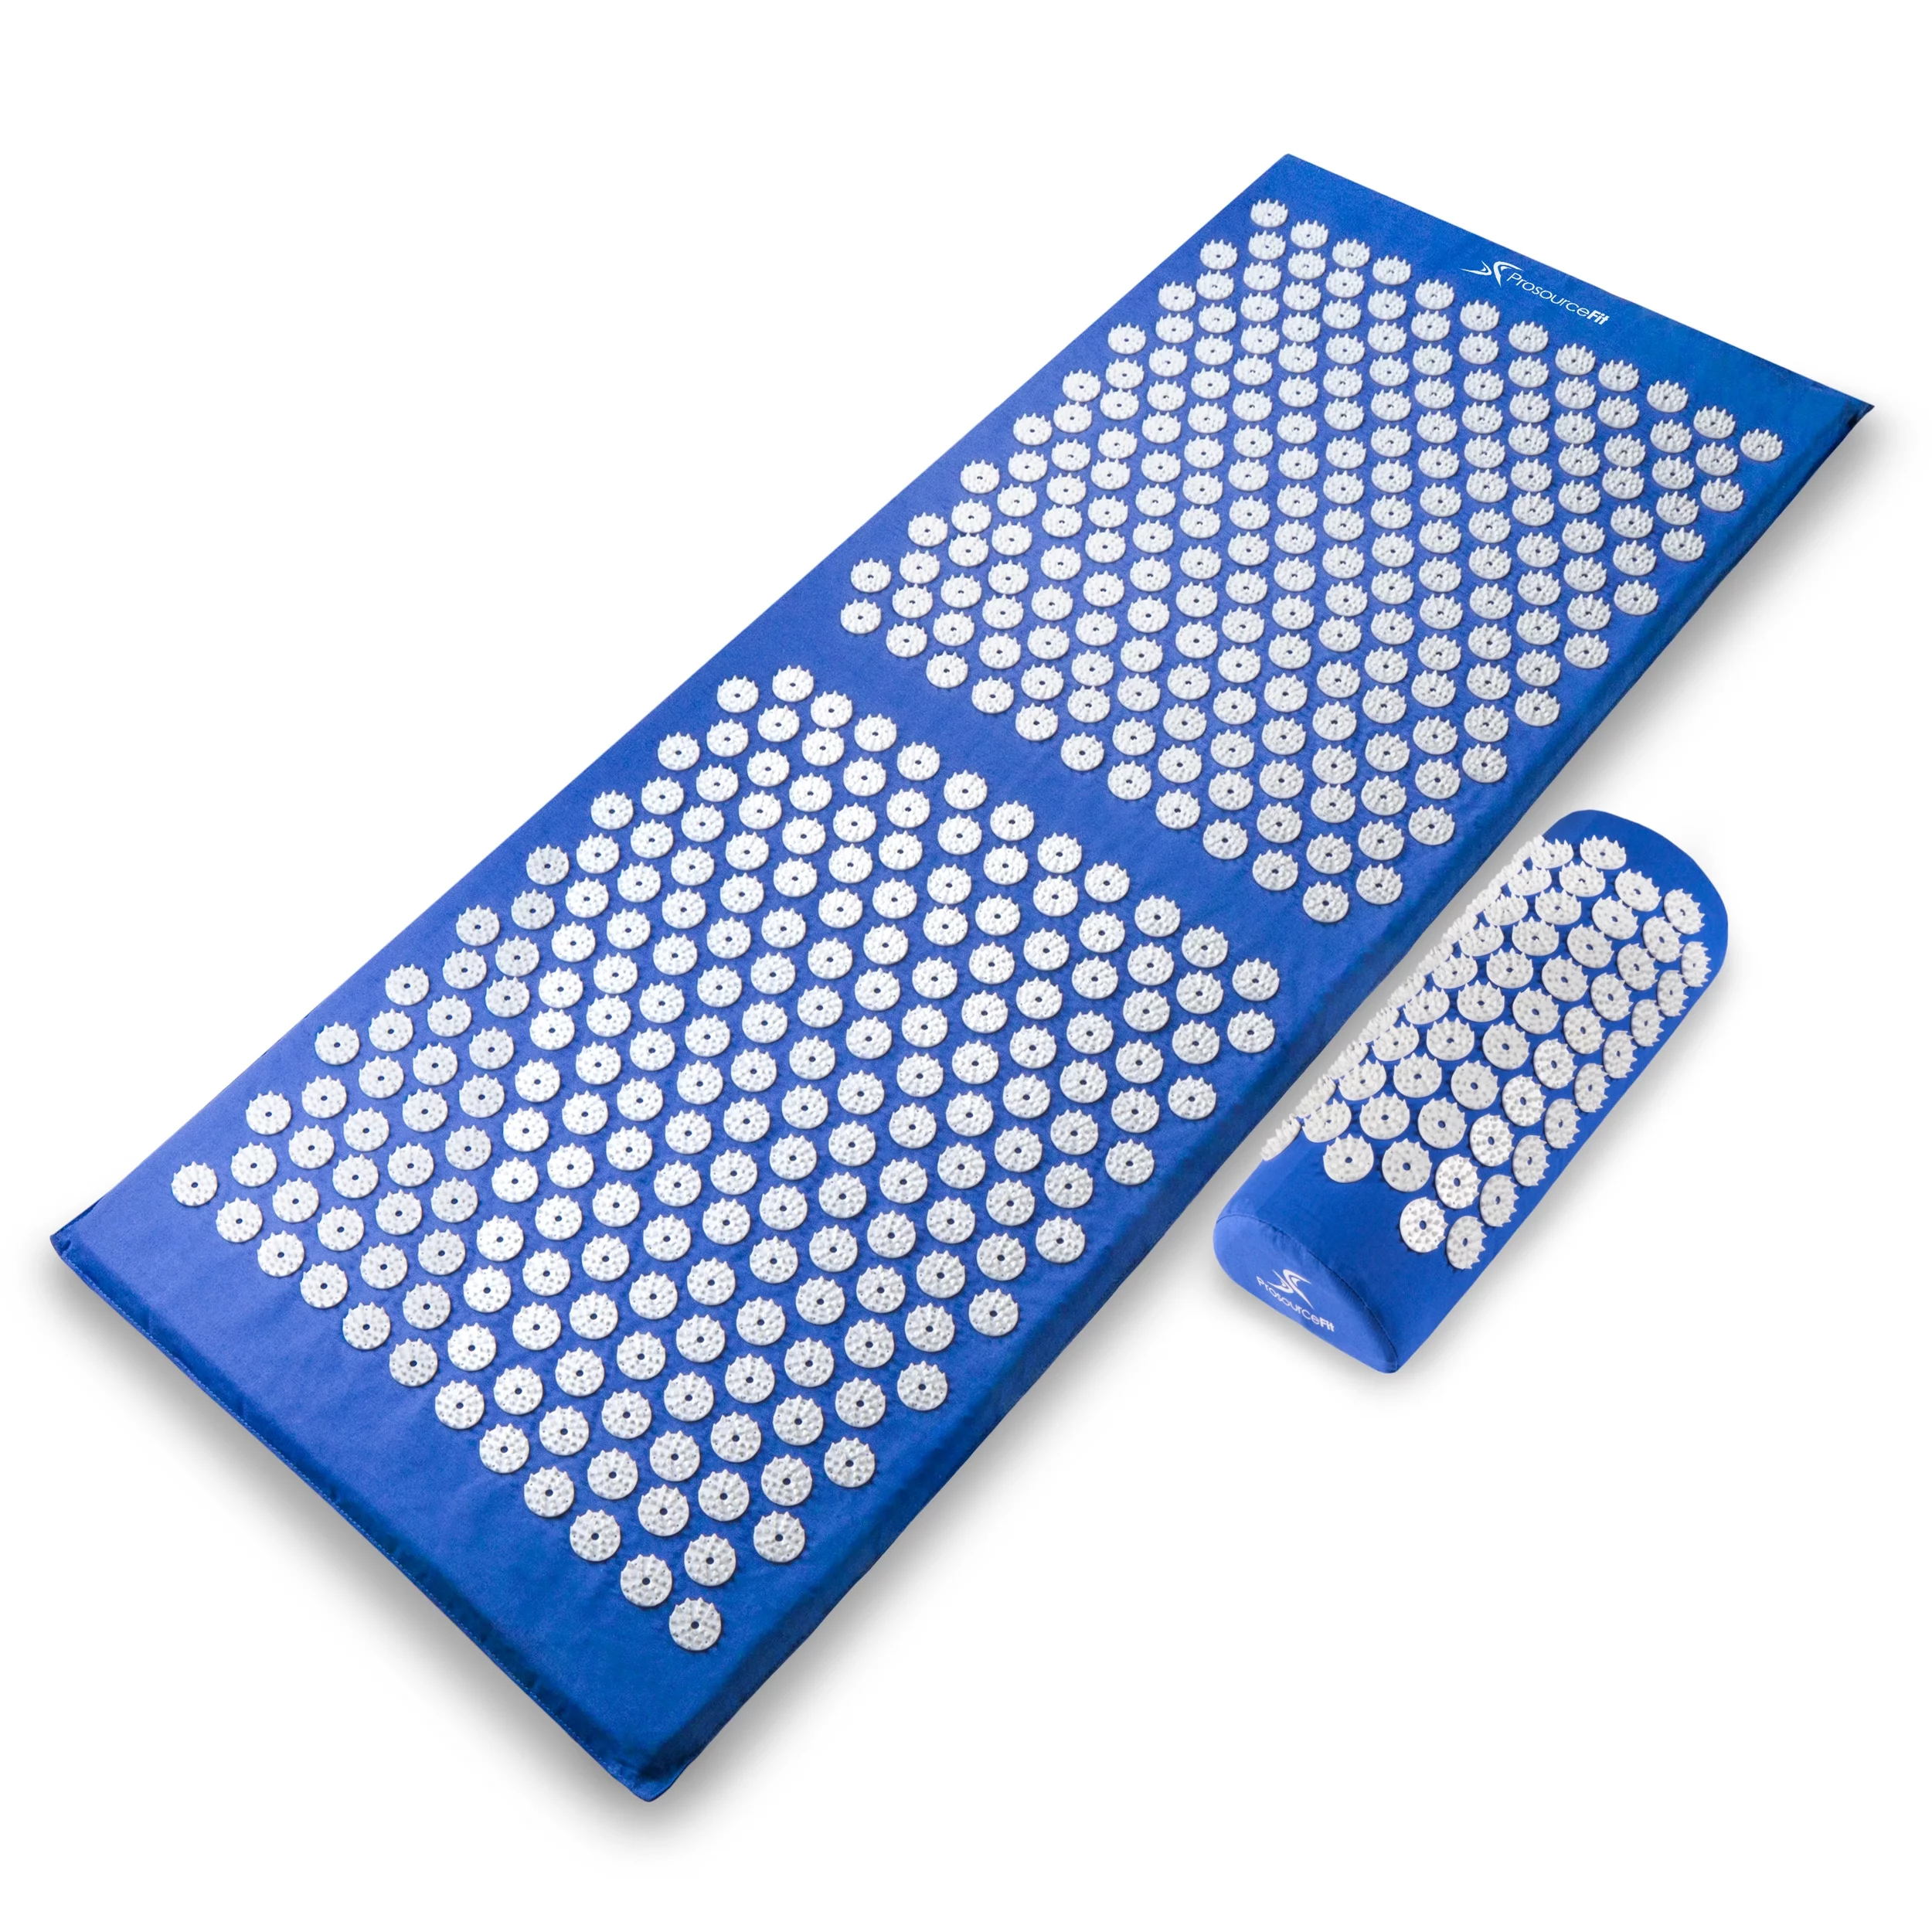 ProsourceFit Full Body Acupressure Mat and Pillow Set, Blue